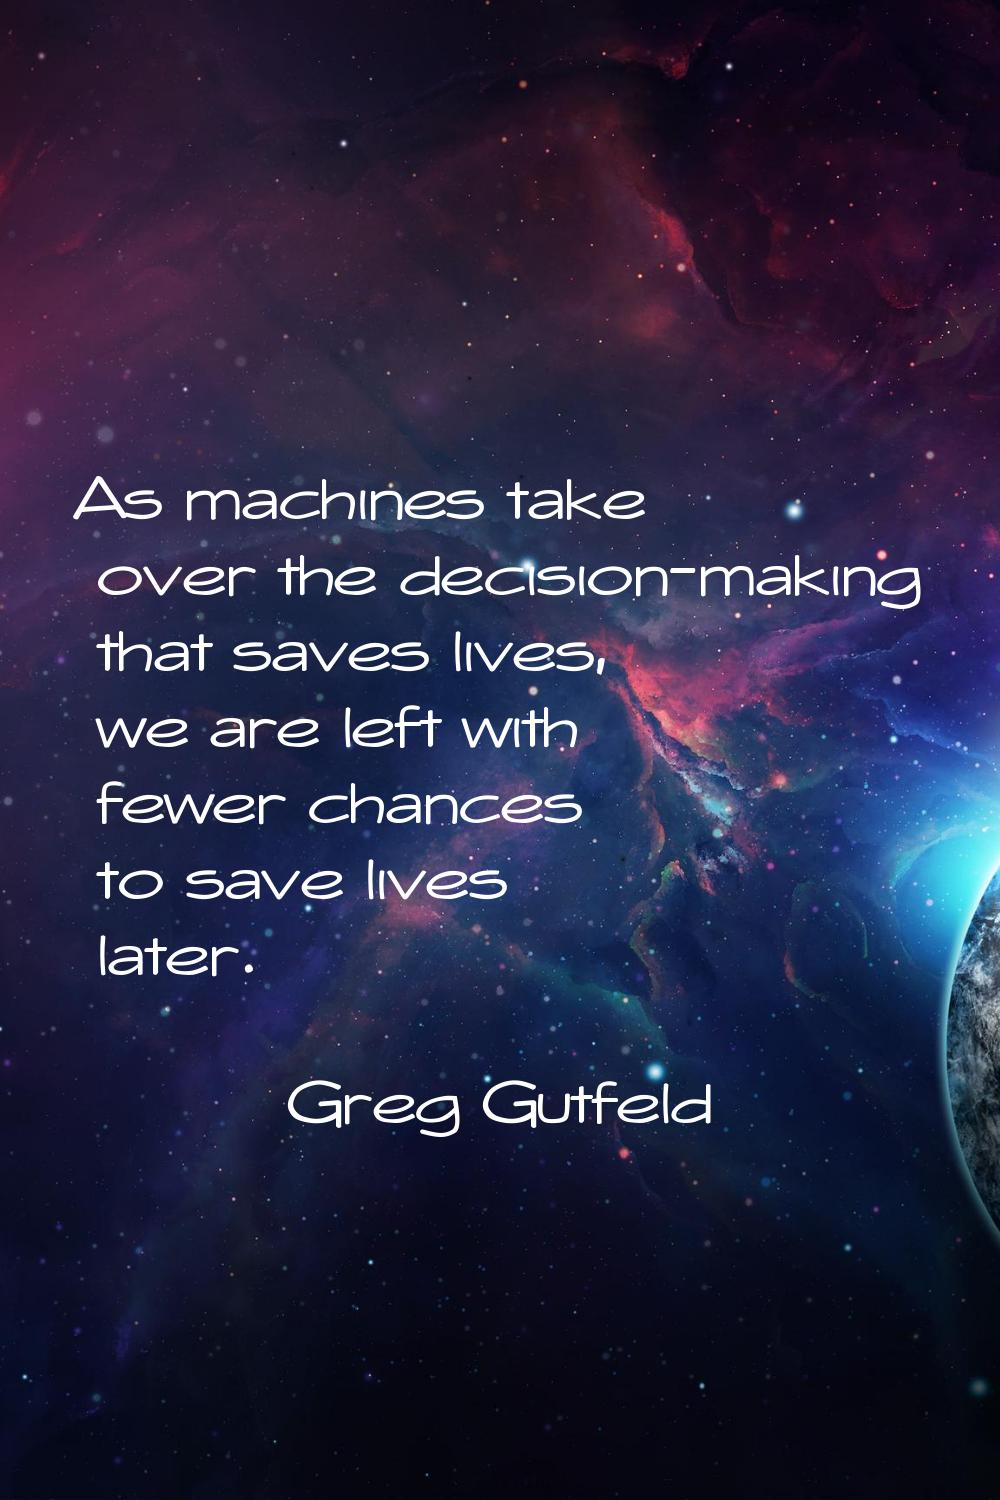 As machines take over the decision-making that saves lives, we are left with fewer chances to save 